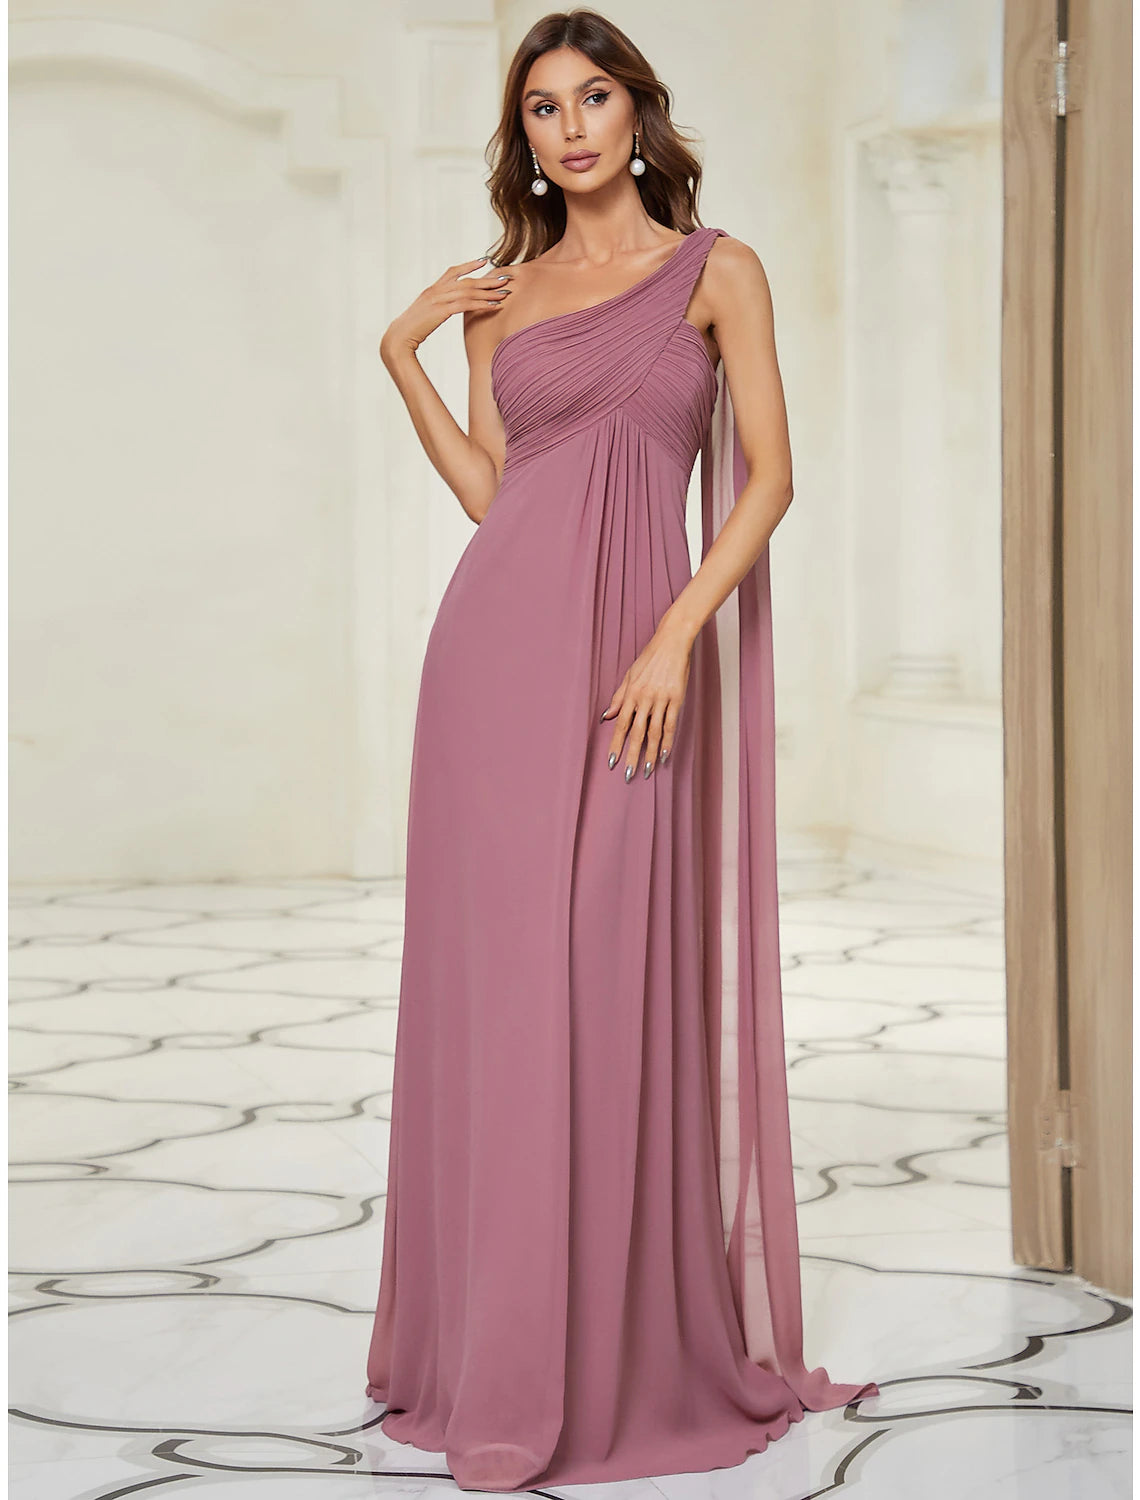 A-Line Evening Gown Empire Dress Wedding Guest Formal Evening Floor Length Sleeveless One Shoulder Bridesmaid Dress Chiffon Backless with Pleats Draping